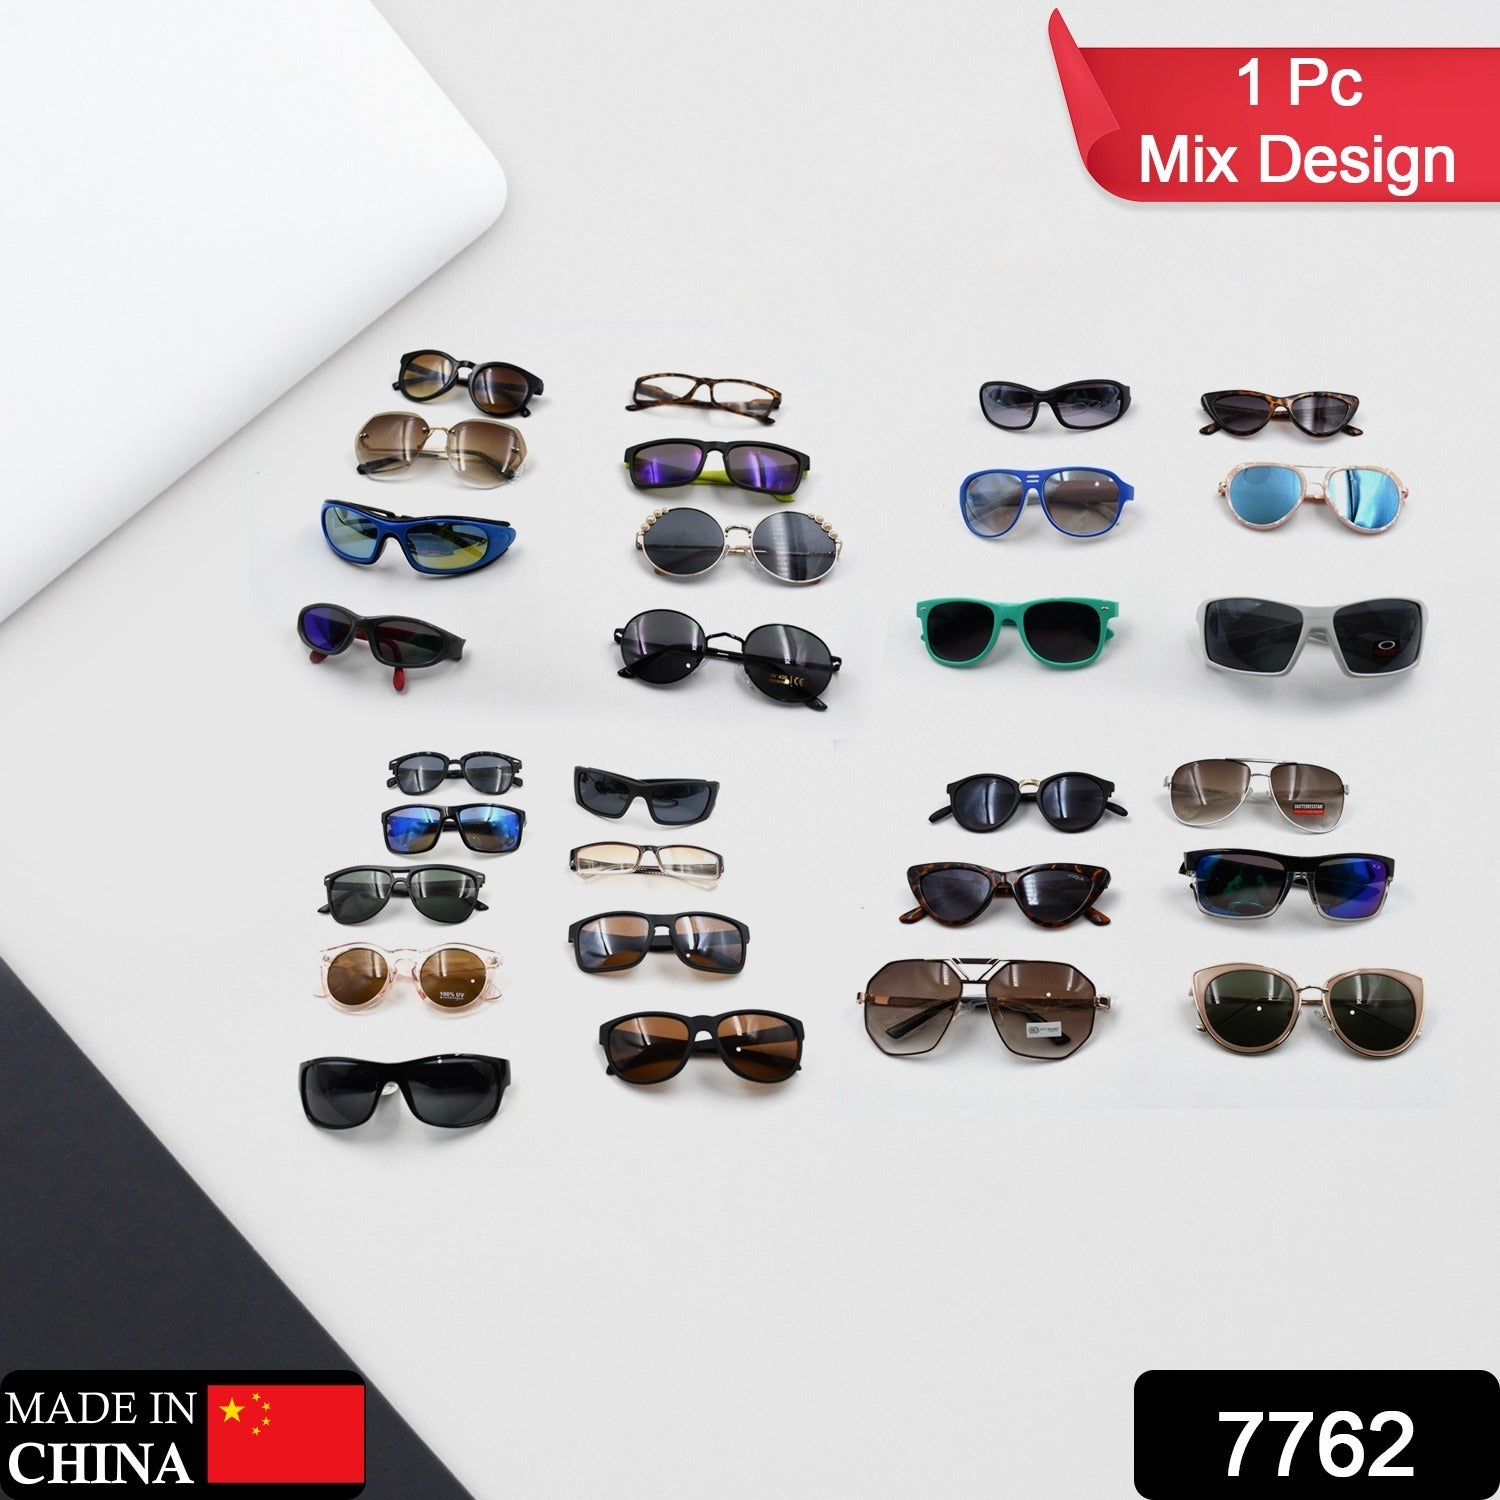 7762 Mix Design & Color Sunglasses for Men & Women UV Protection for Outdoor Fishing Driving or Multi-Purpose Sunglasses (1pc)